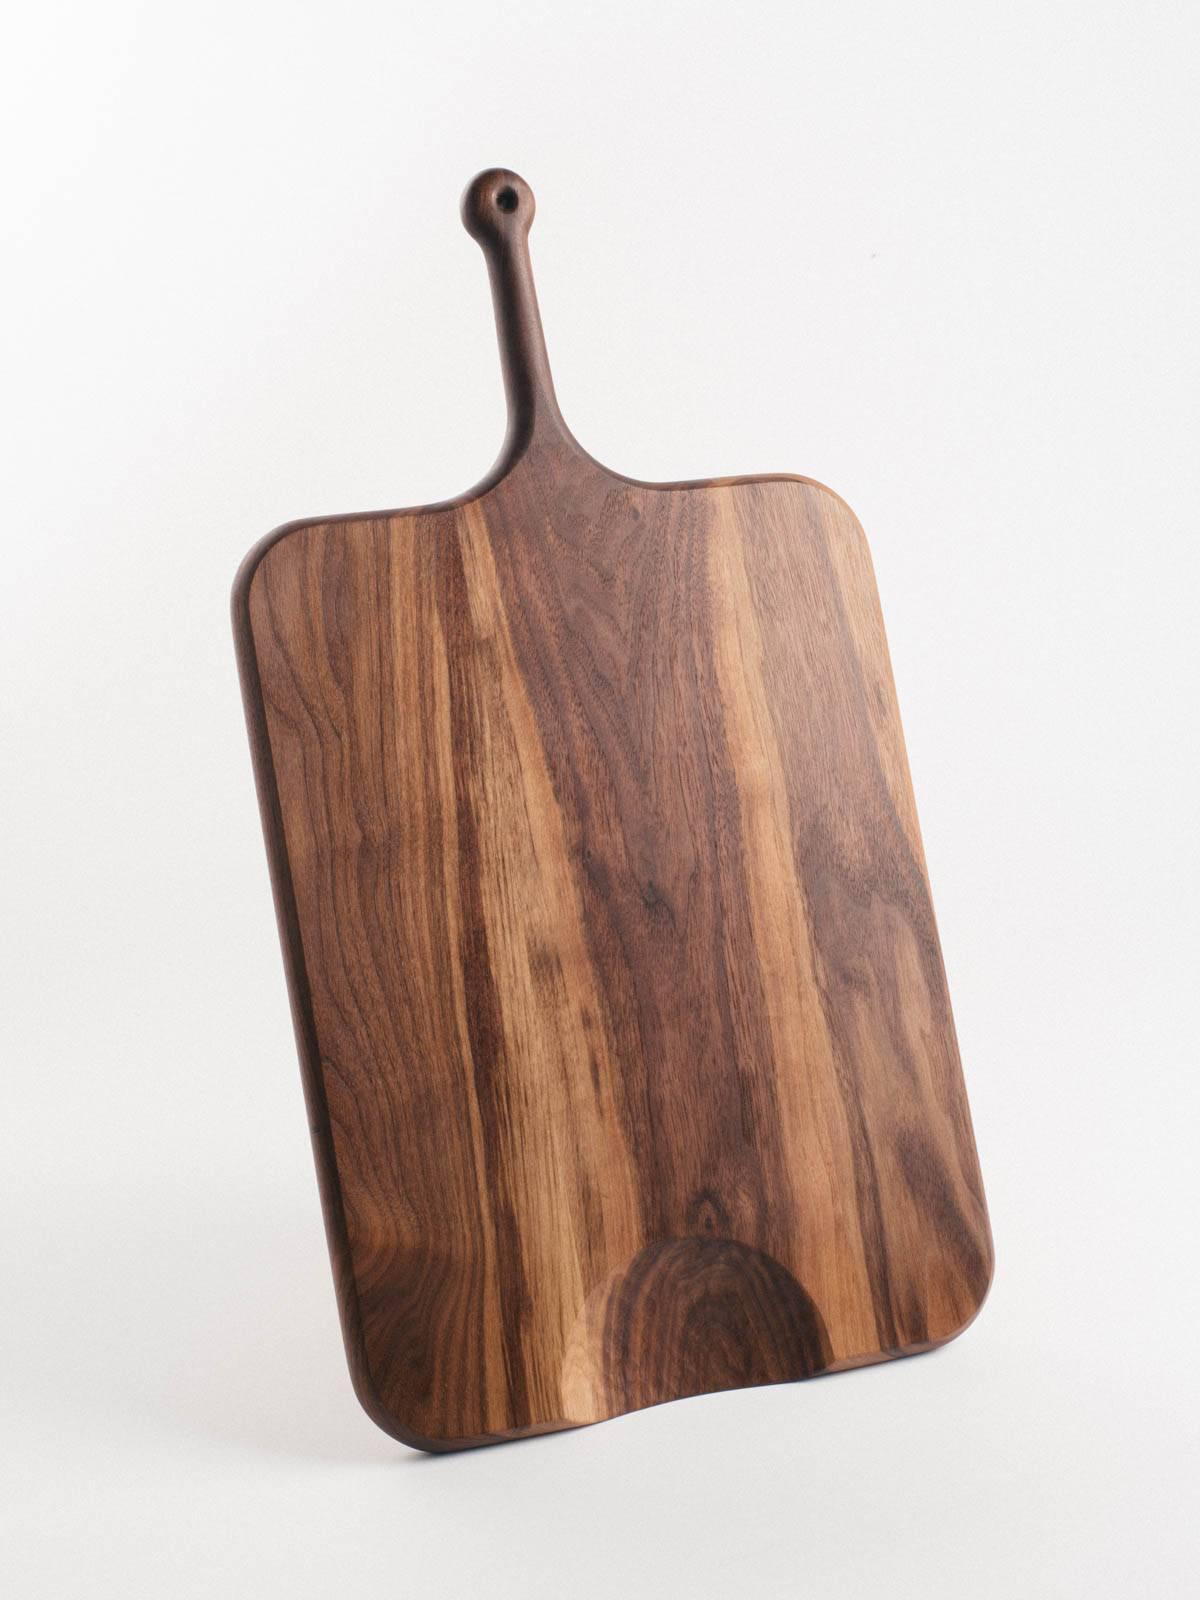 Our serving boards are elegantly shaped with a soft feel. Handles are ideally sized for the palm and include a leather bootlace hanging loop. Half-moon cutouts serve as a second handle or to direct chopped fare. Each board is shaped, seasoned, and